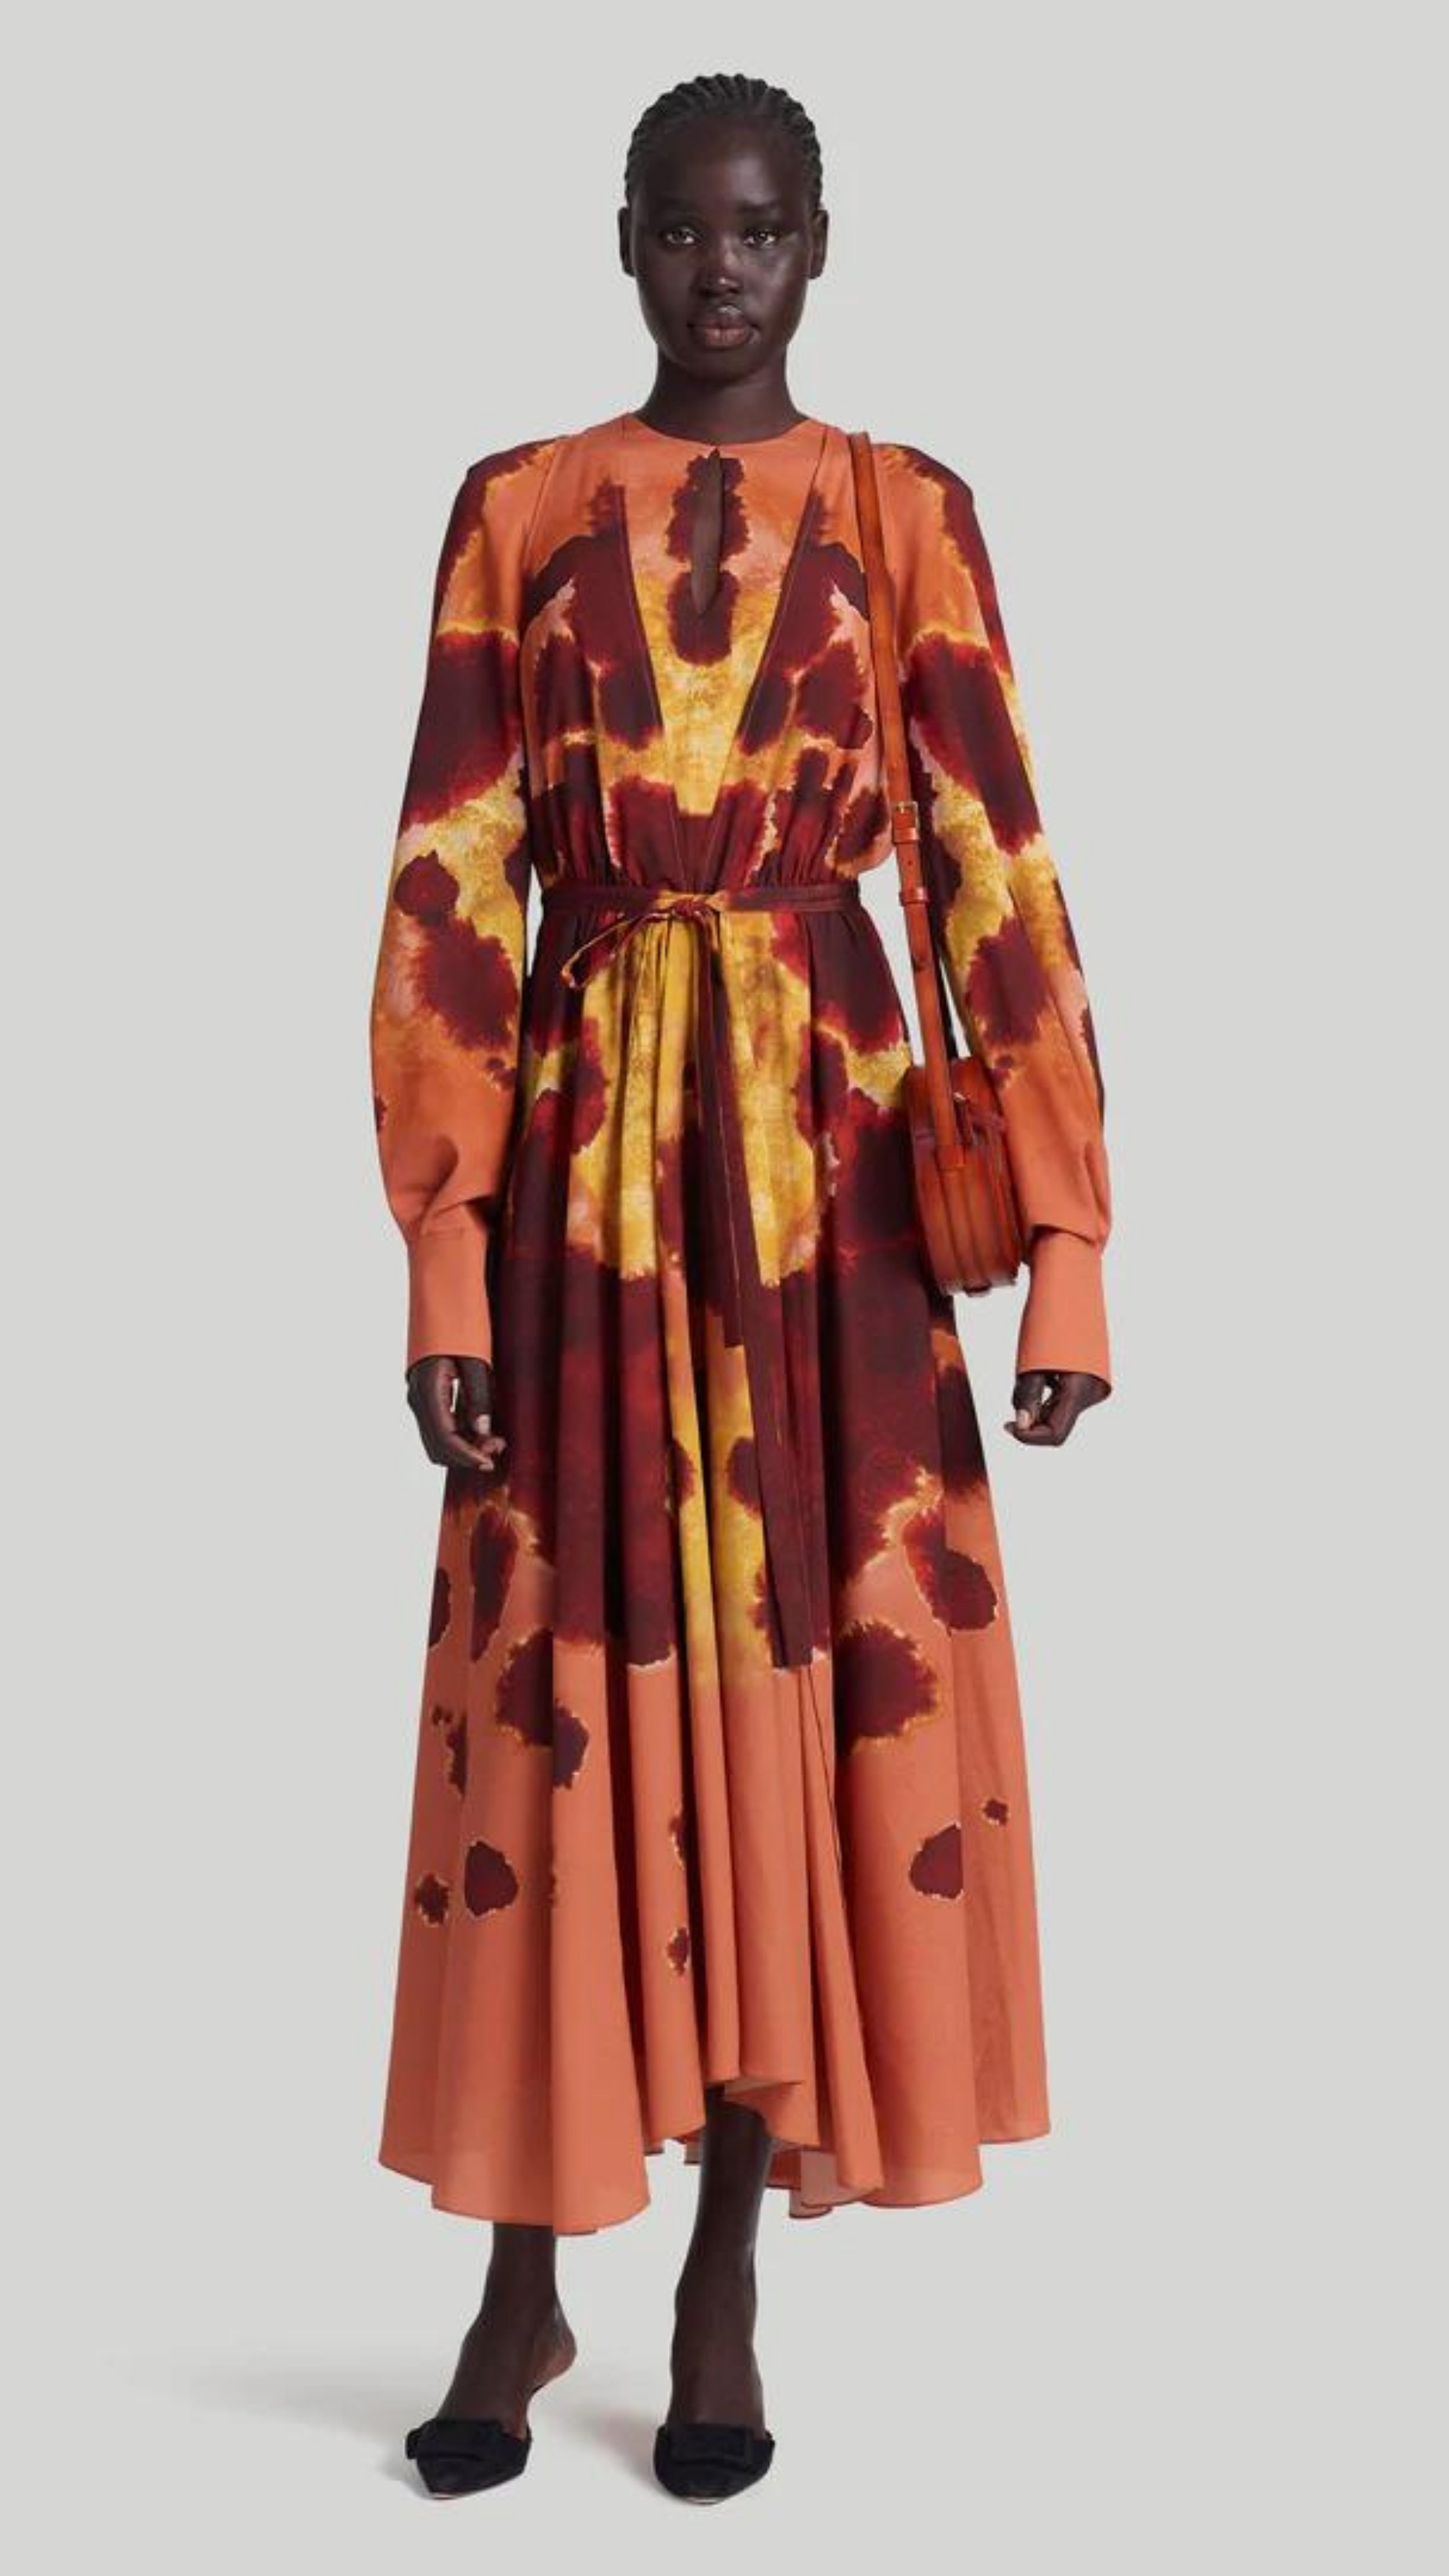 Altuzarra Peirene Dress. The Peirene midi dress has a relaxed silhouette with a tie at the waist. The keyhole neck can be styled closed or open, creating a v-neck look. Made in beautiful peach, cranberry, and yellow dyed pattern. Shown on model facing front